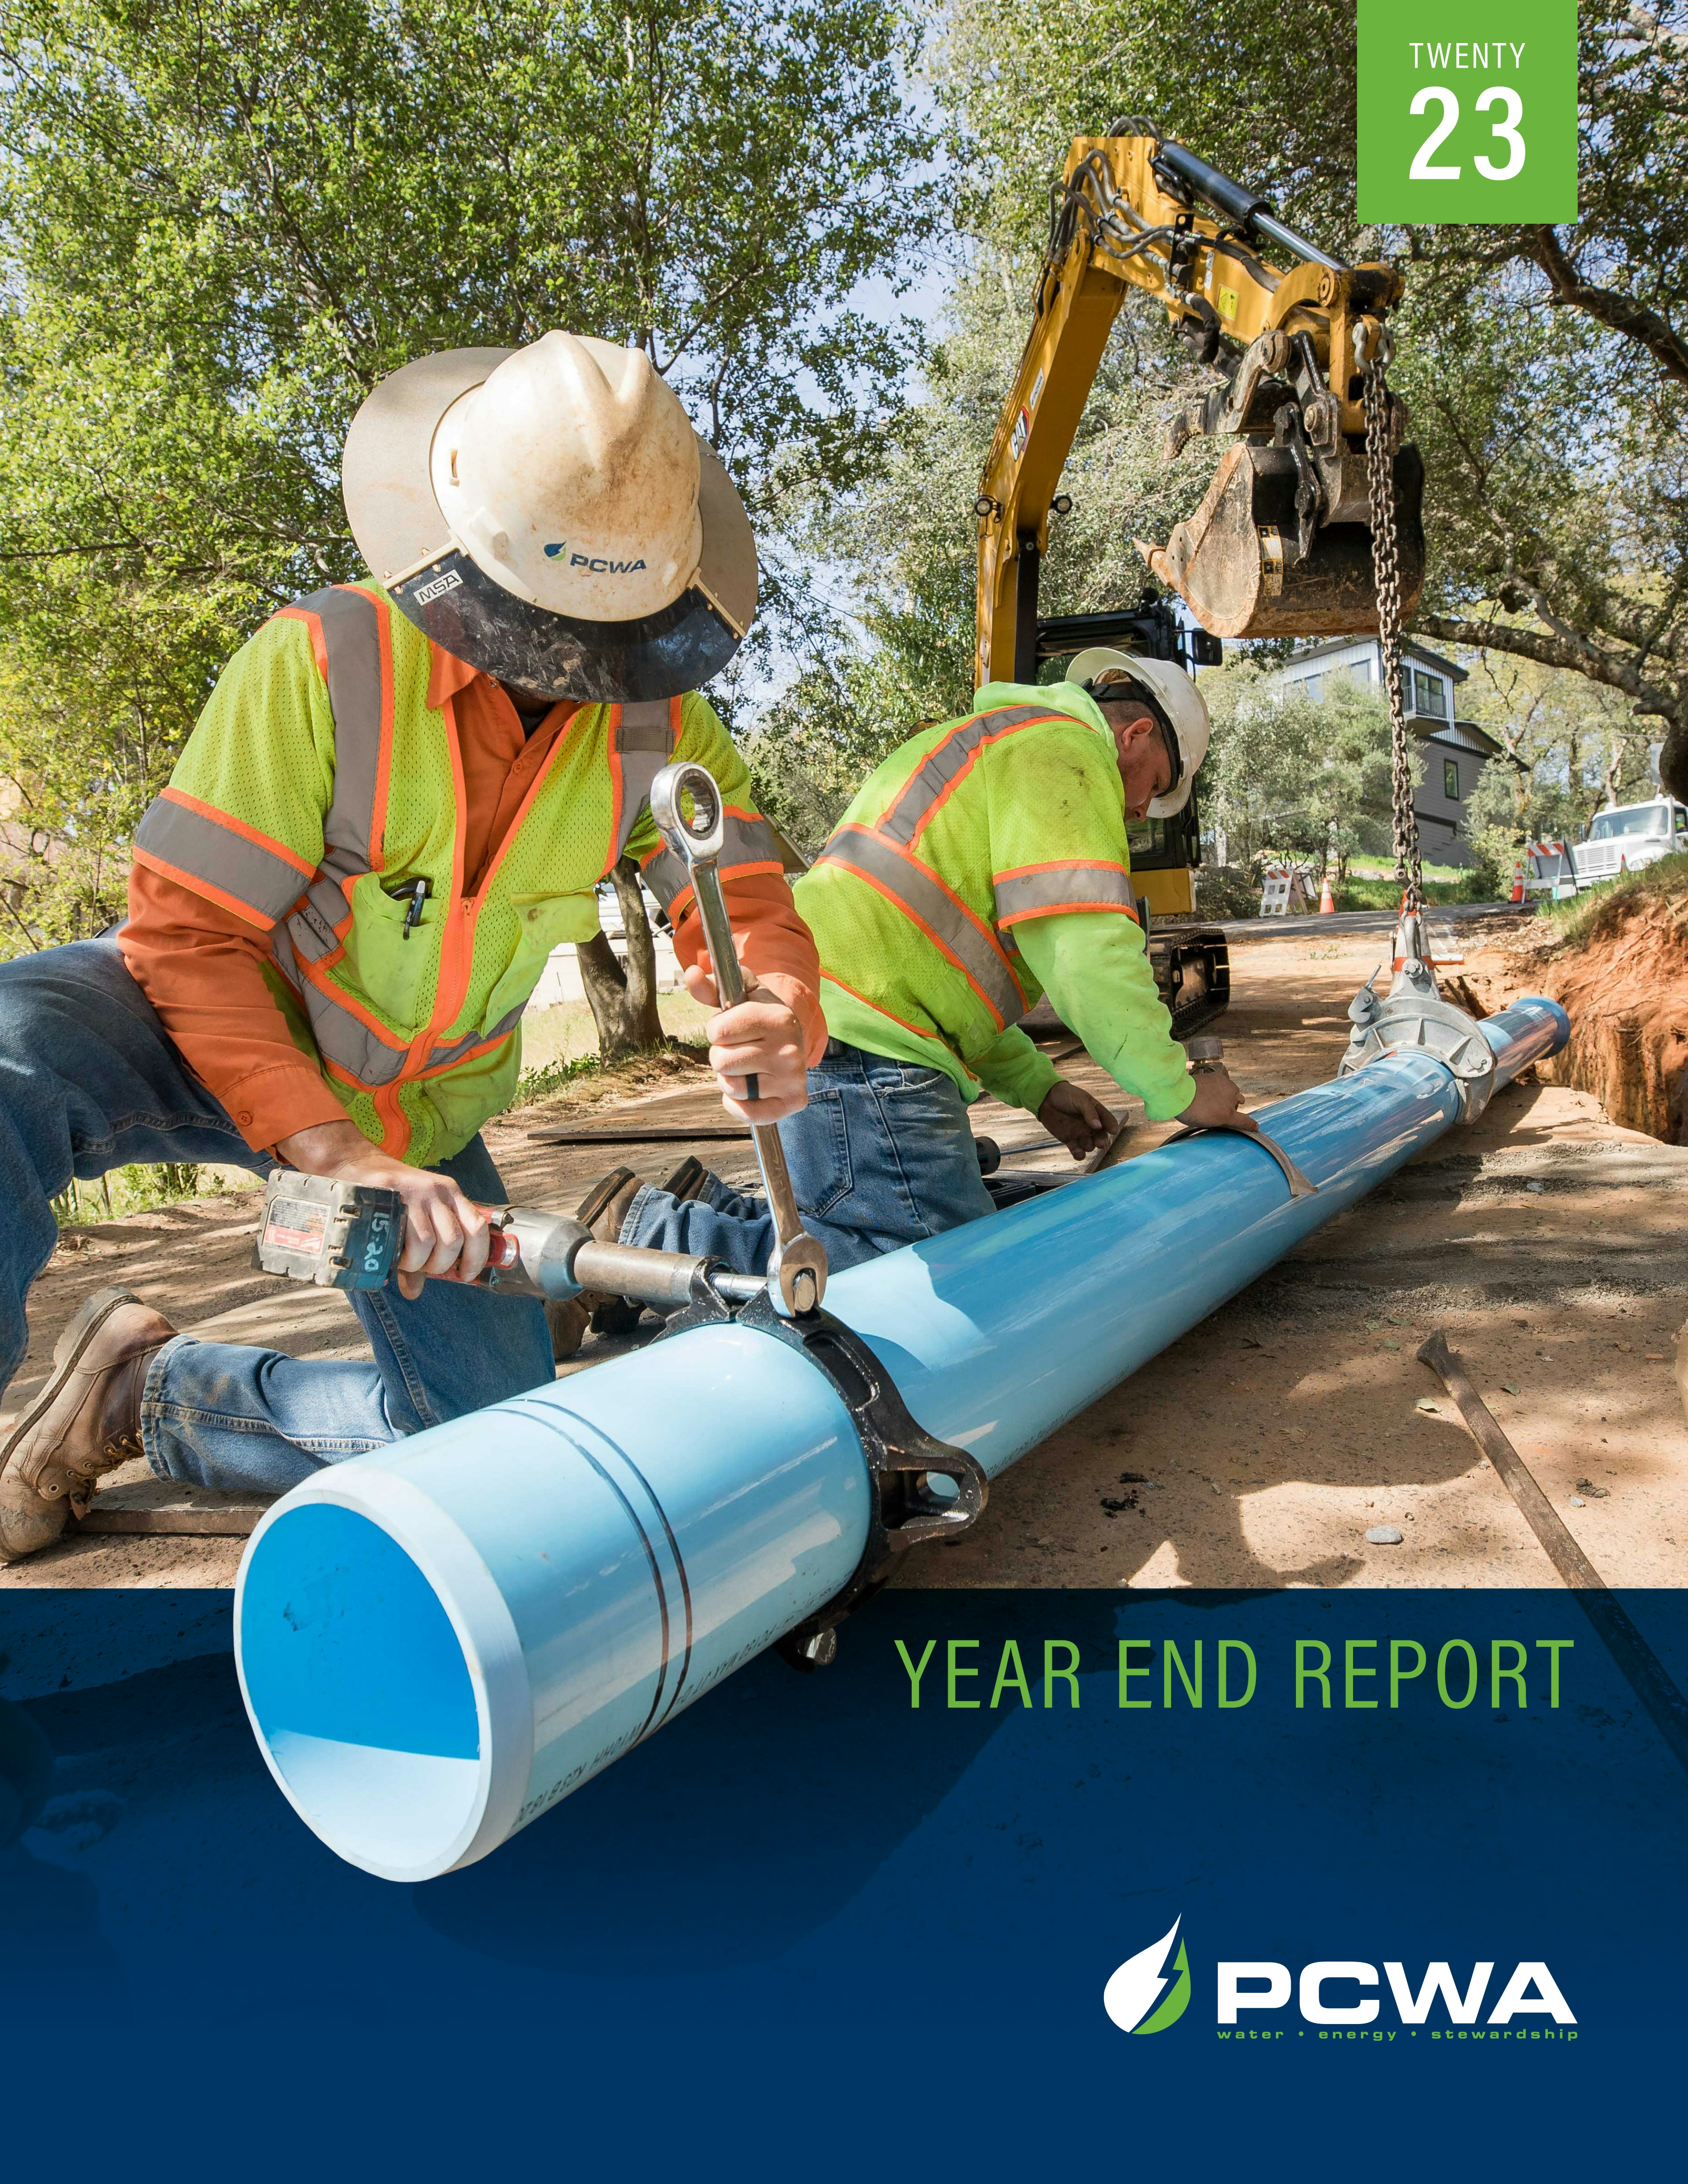 Thumbnail image and link for 2023 Year End Report publication